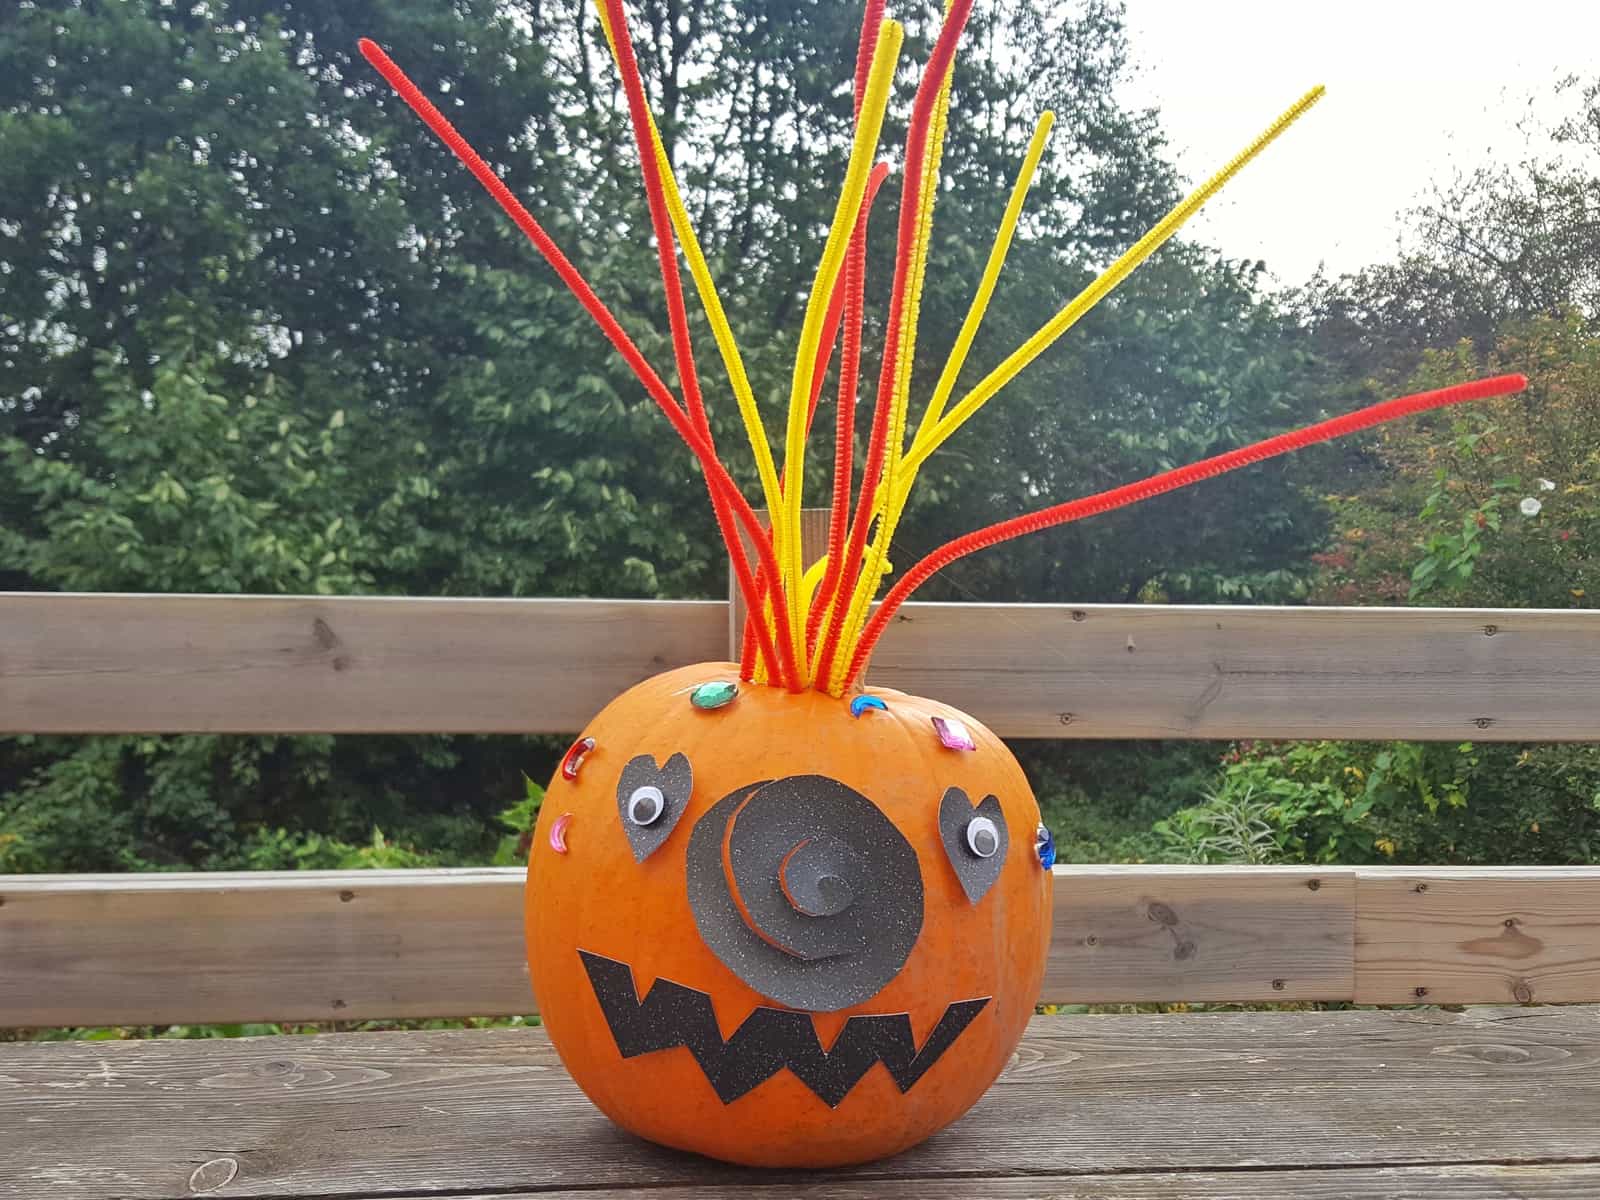 Halloween | These no-carve Halloween pumpkins are perfect for families with young children. Even toddlers can get involved with decorating their own pumpkin. This is a totally safe craft for children and they can play with it again and again with little or no adult supervision. You need minimal craft supplies and a pumpkin!